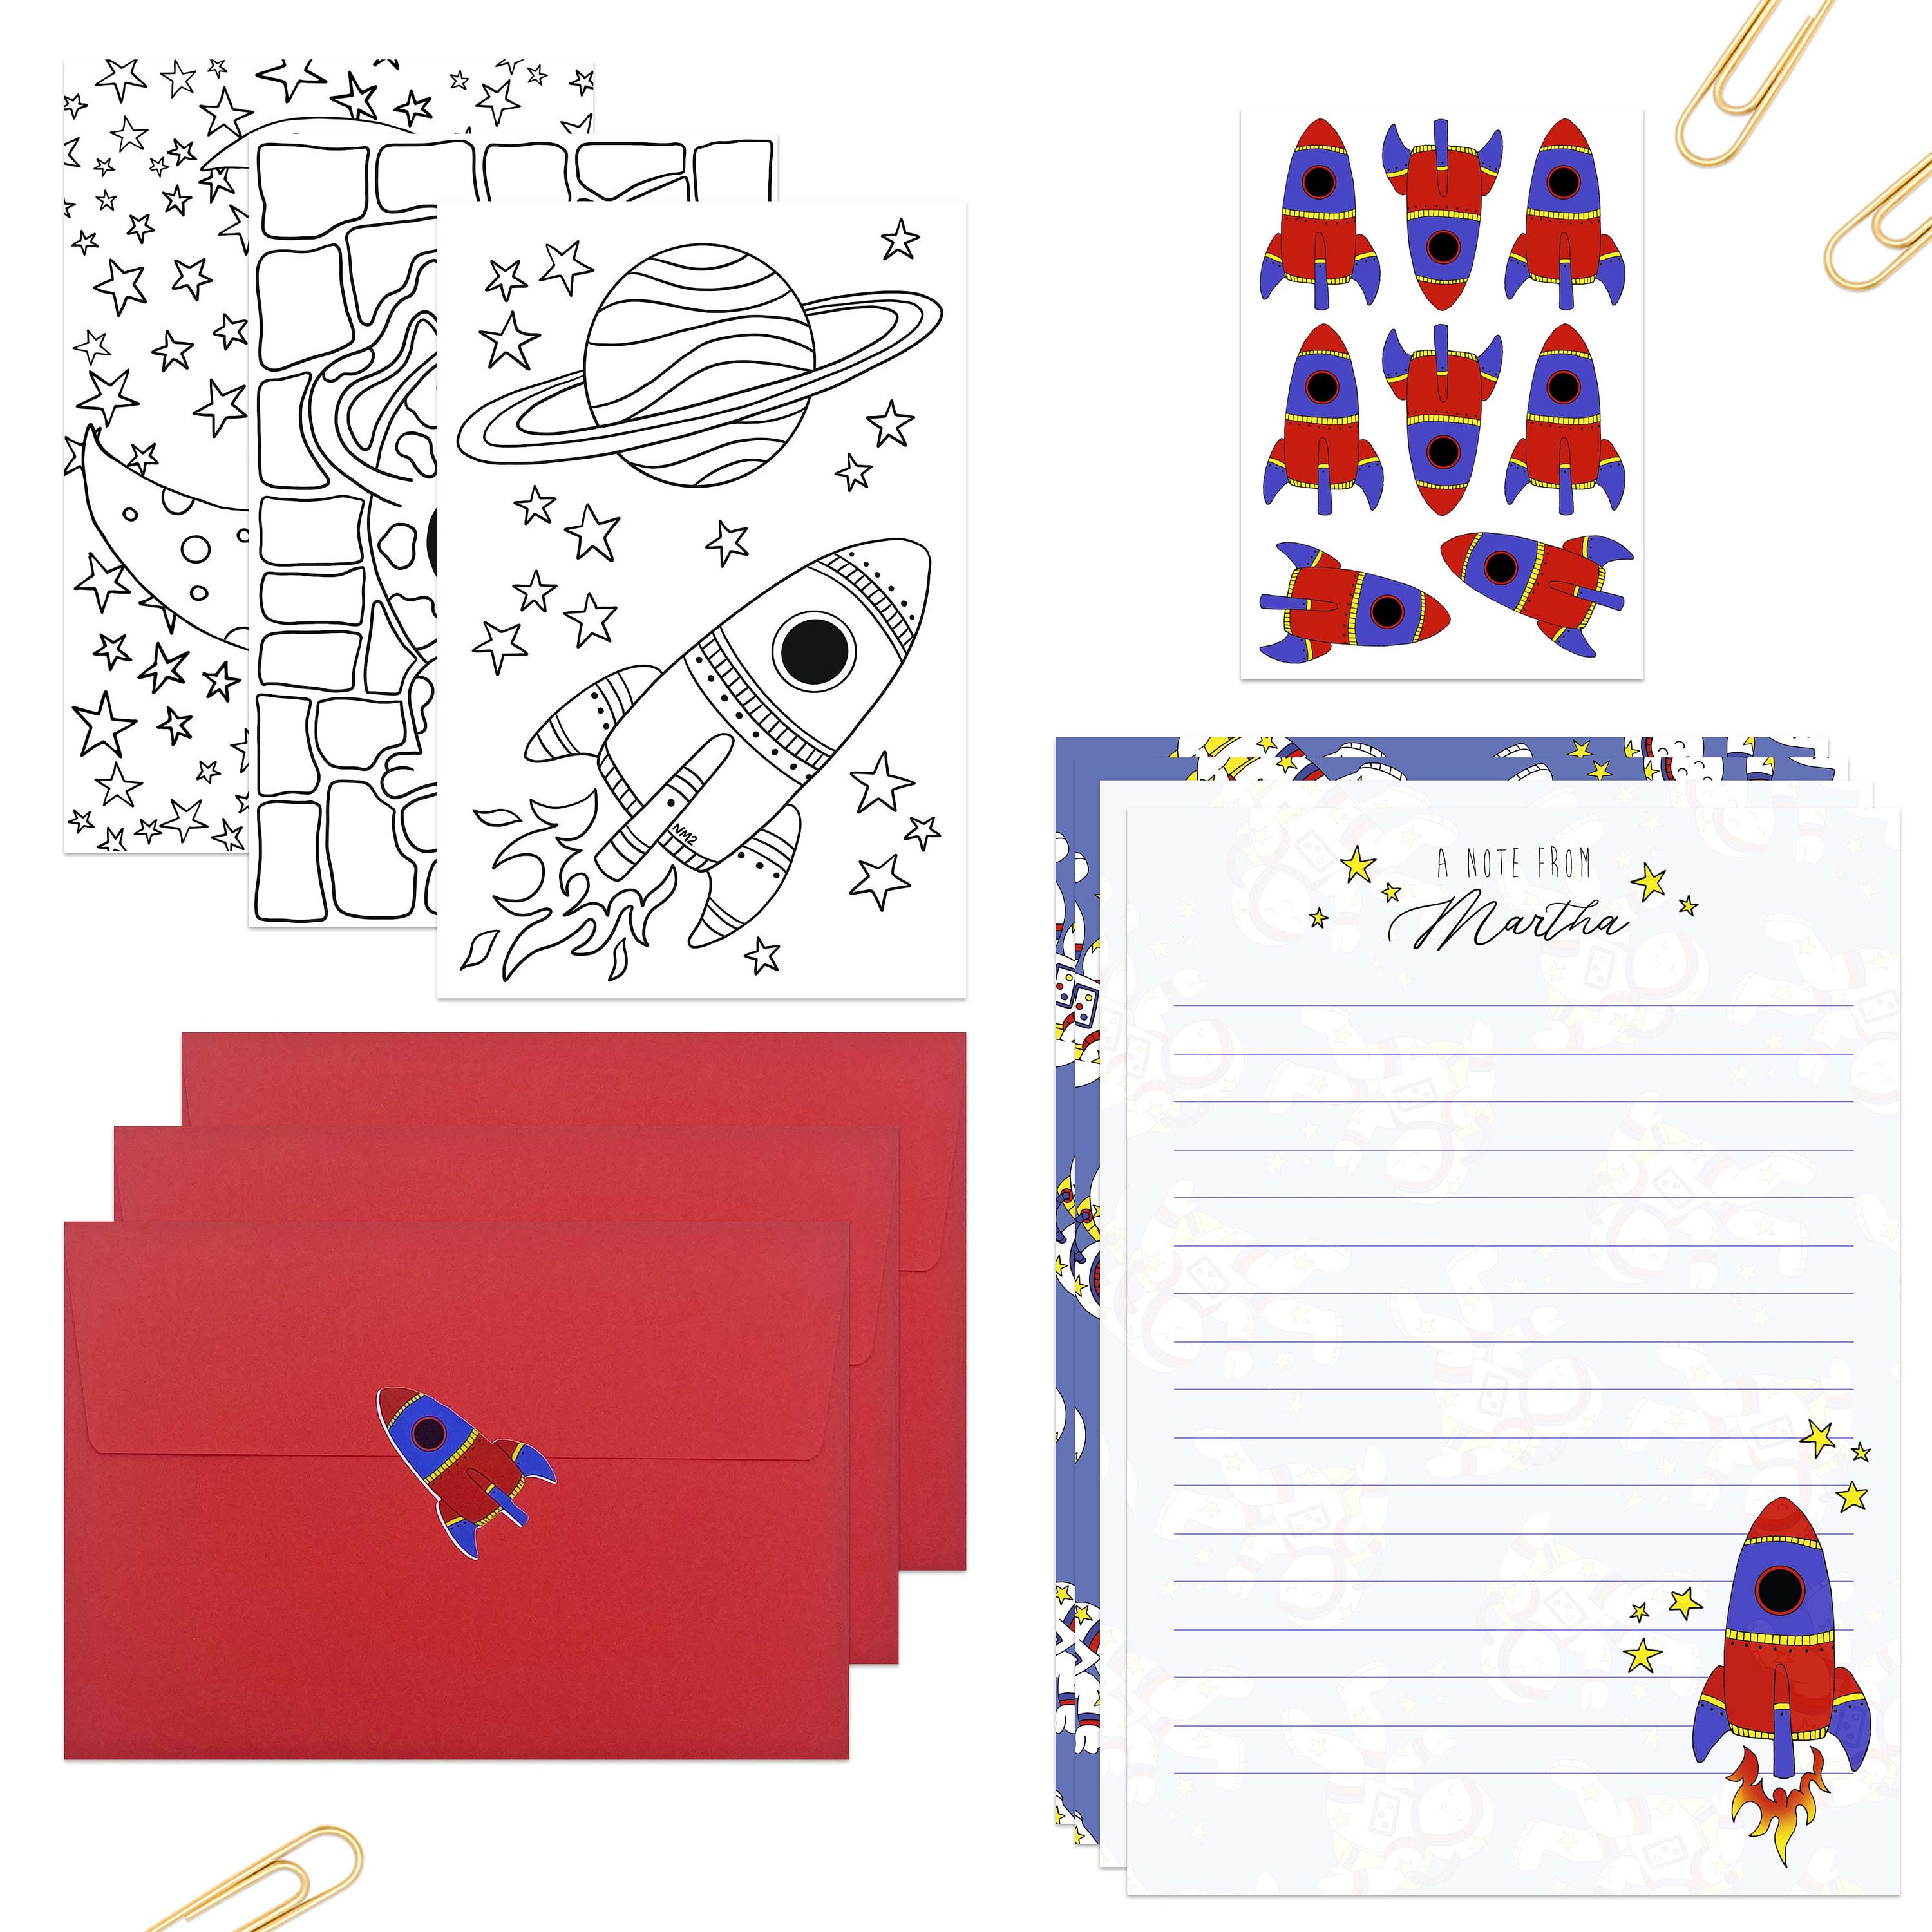 Space Astronaut Personalised Children's Stationery Set Letter Writing Paper and Envelopes